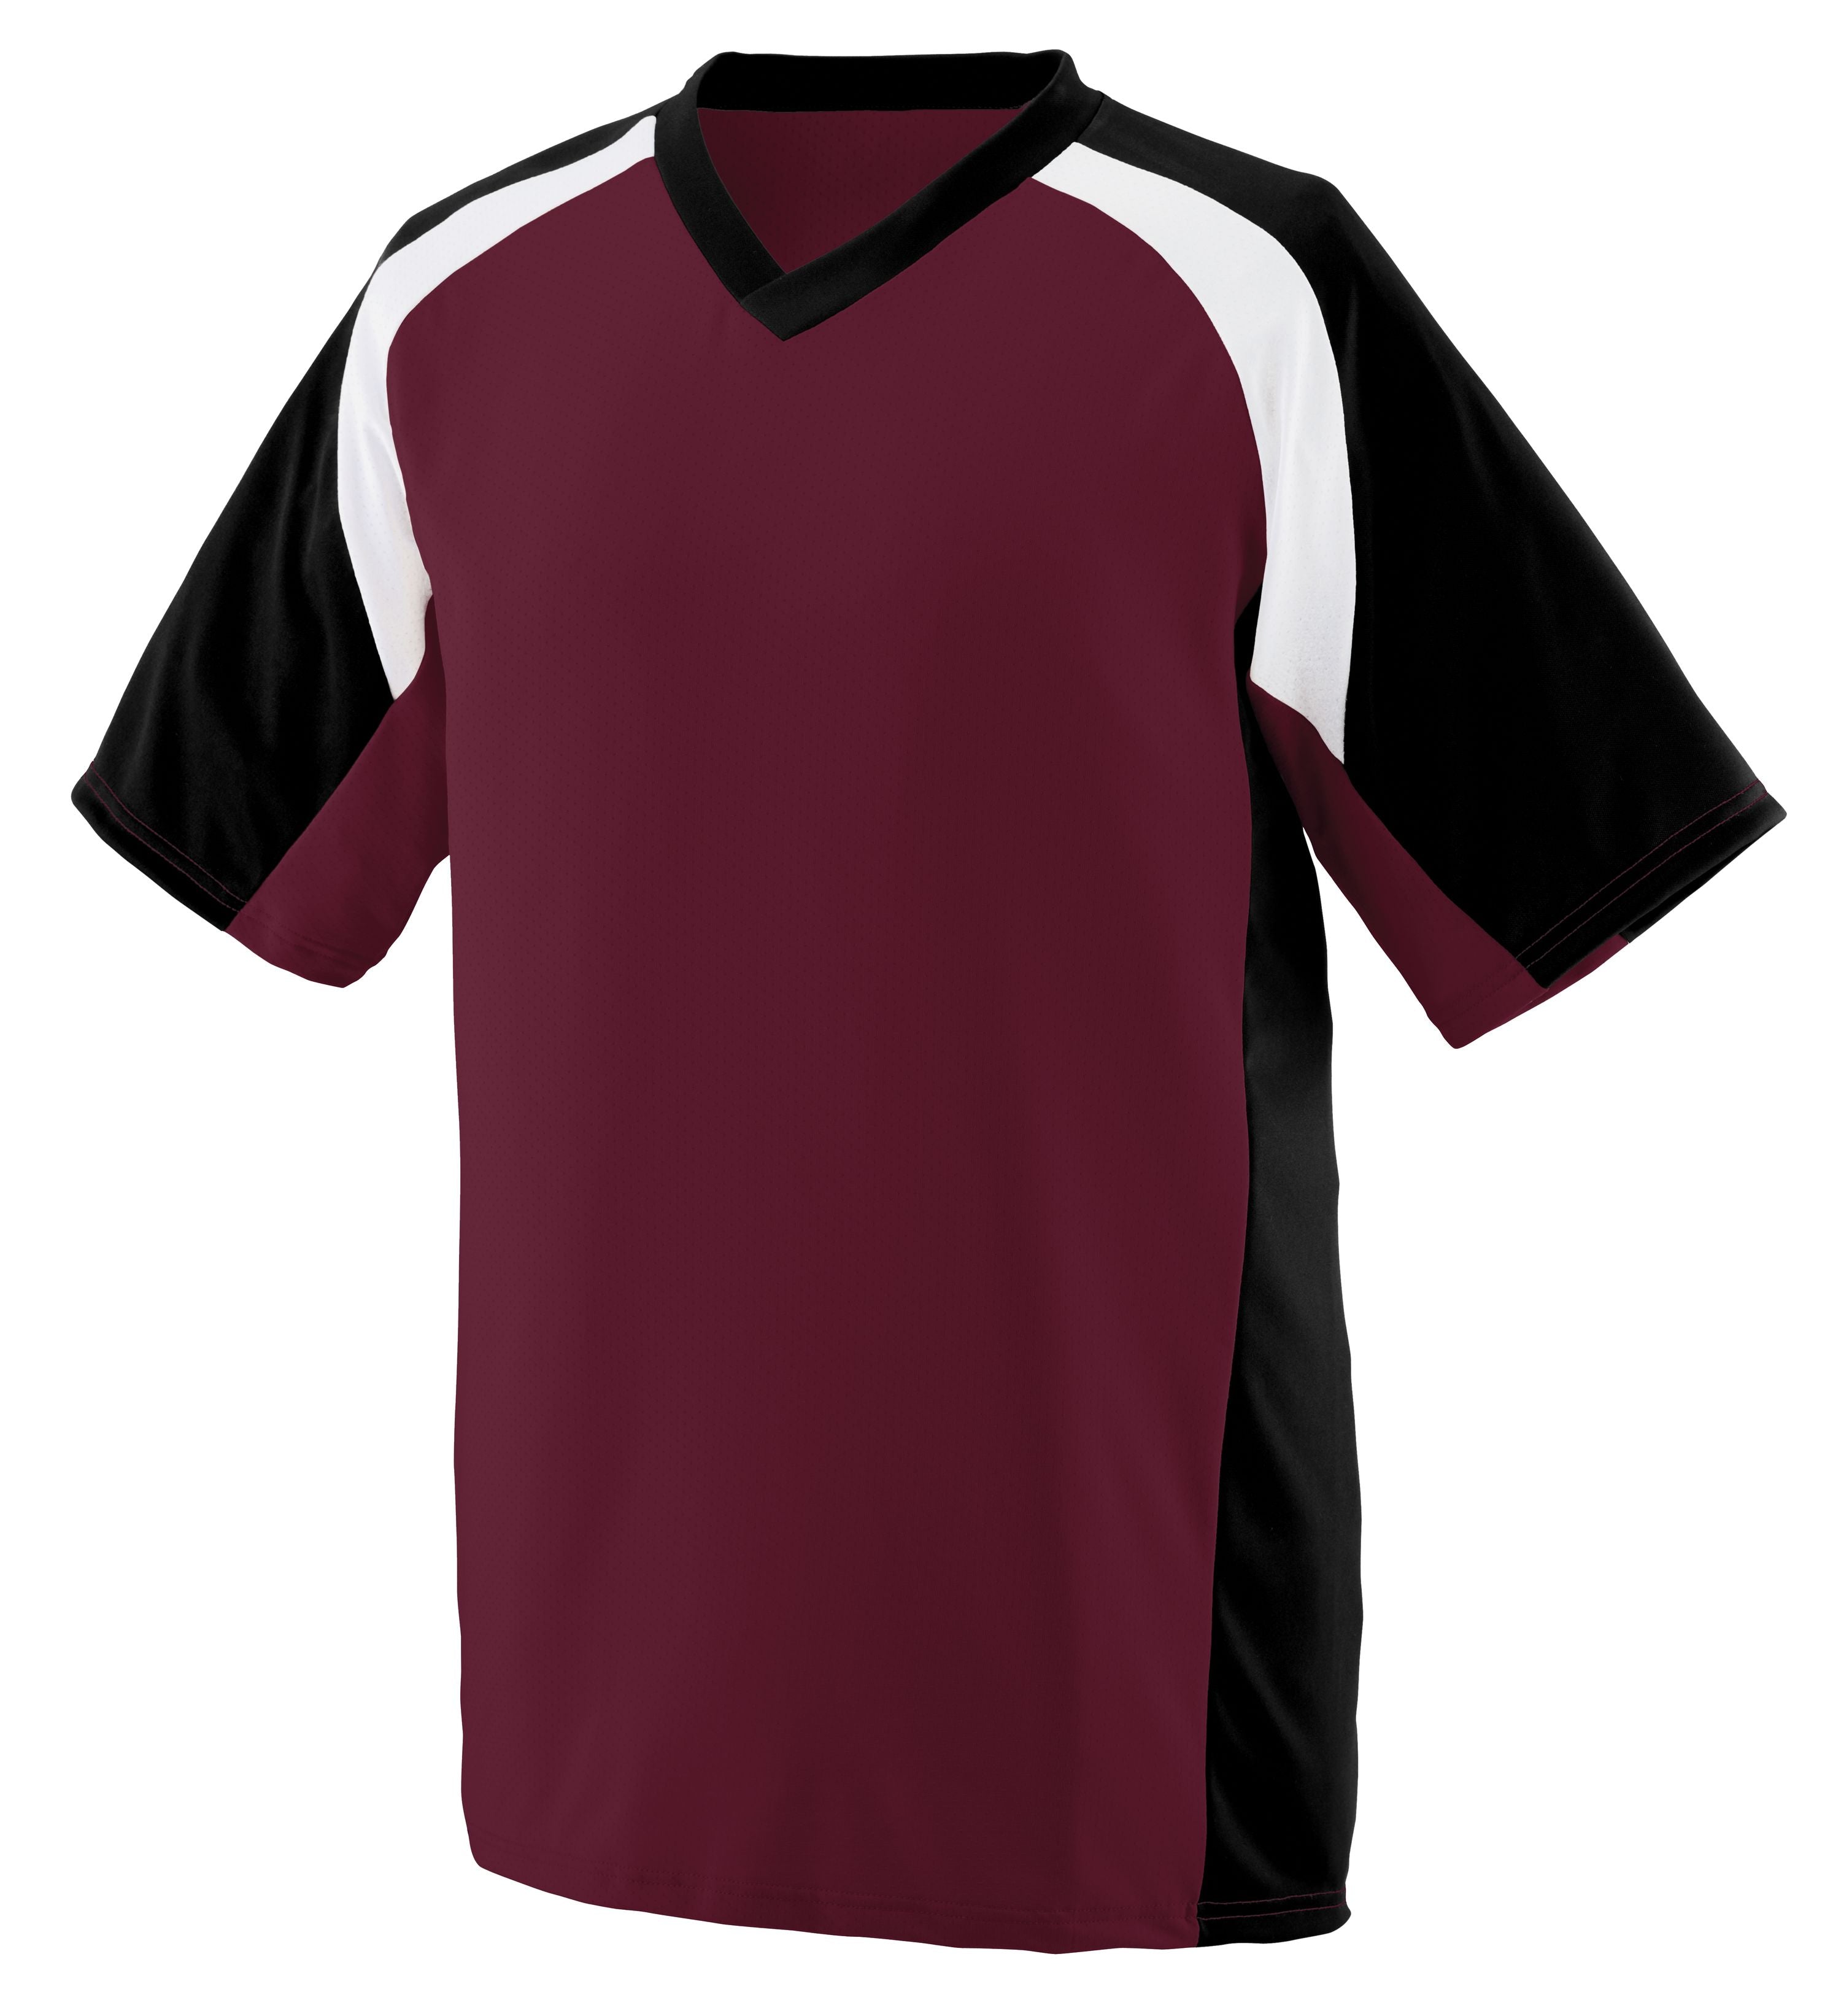 Augusta Sportswear Nitro Jersey in Maroon/Black/White  -Part of the Adult, Adult-Jersey, Augusta-Products, Football, Shirts, All-Sports, All-Sports-1 product lines at KanaleyCreations.com